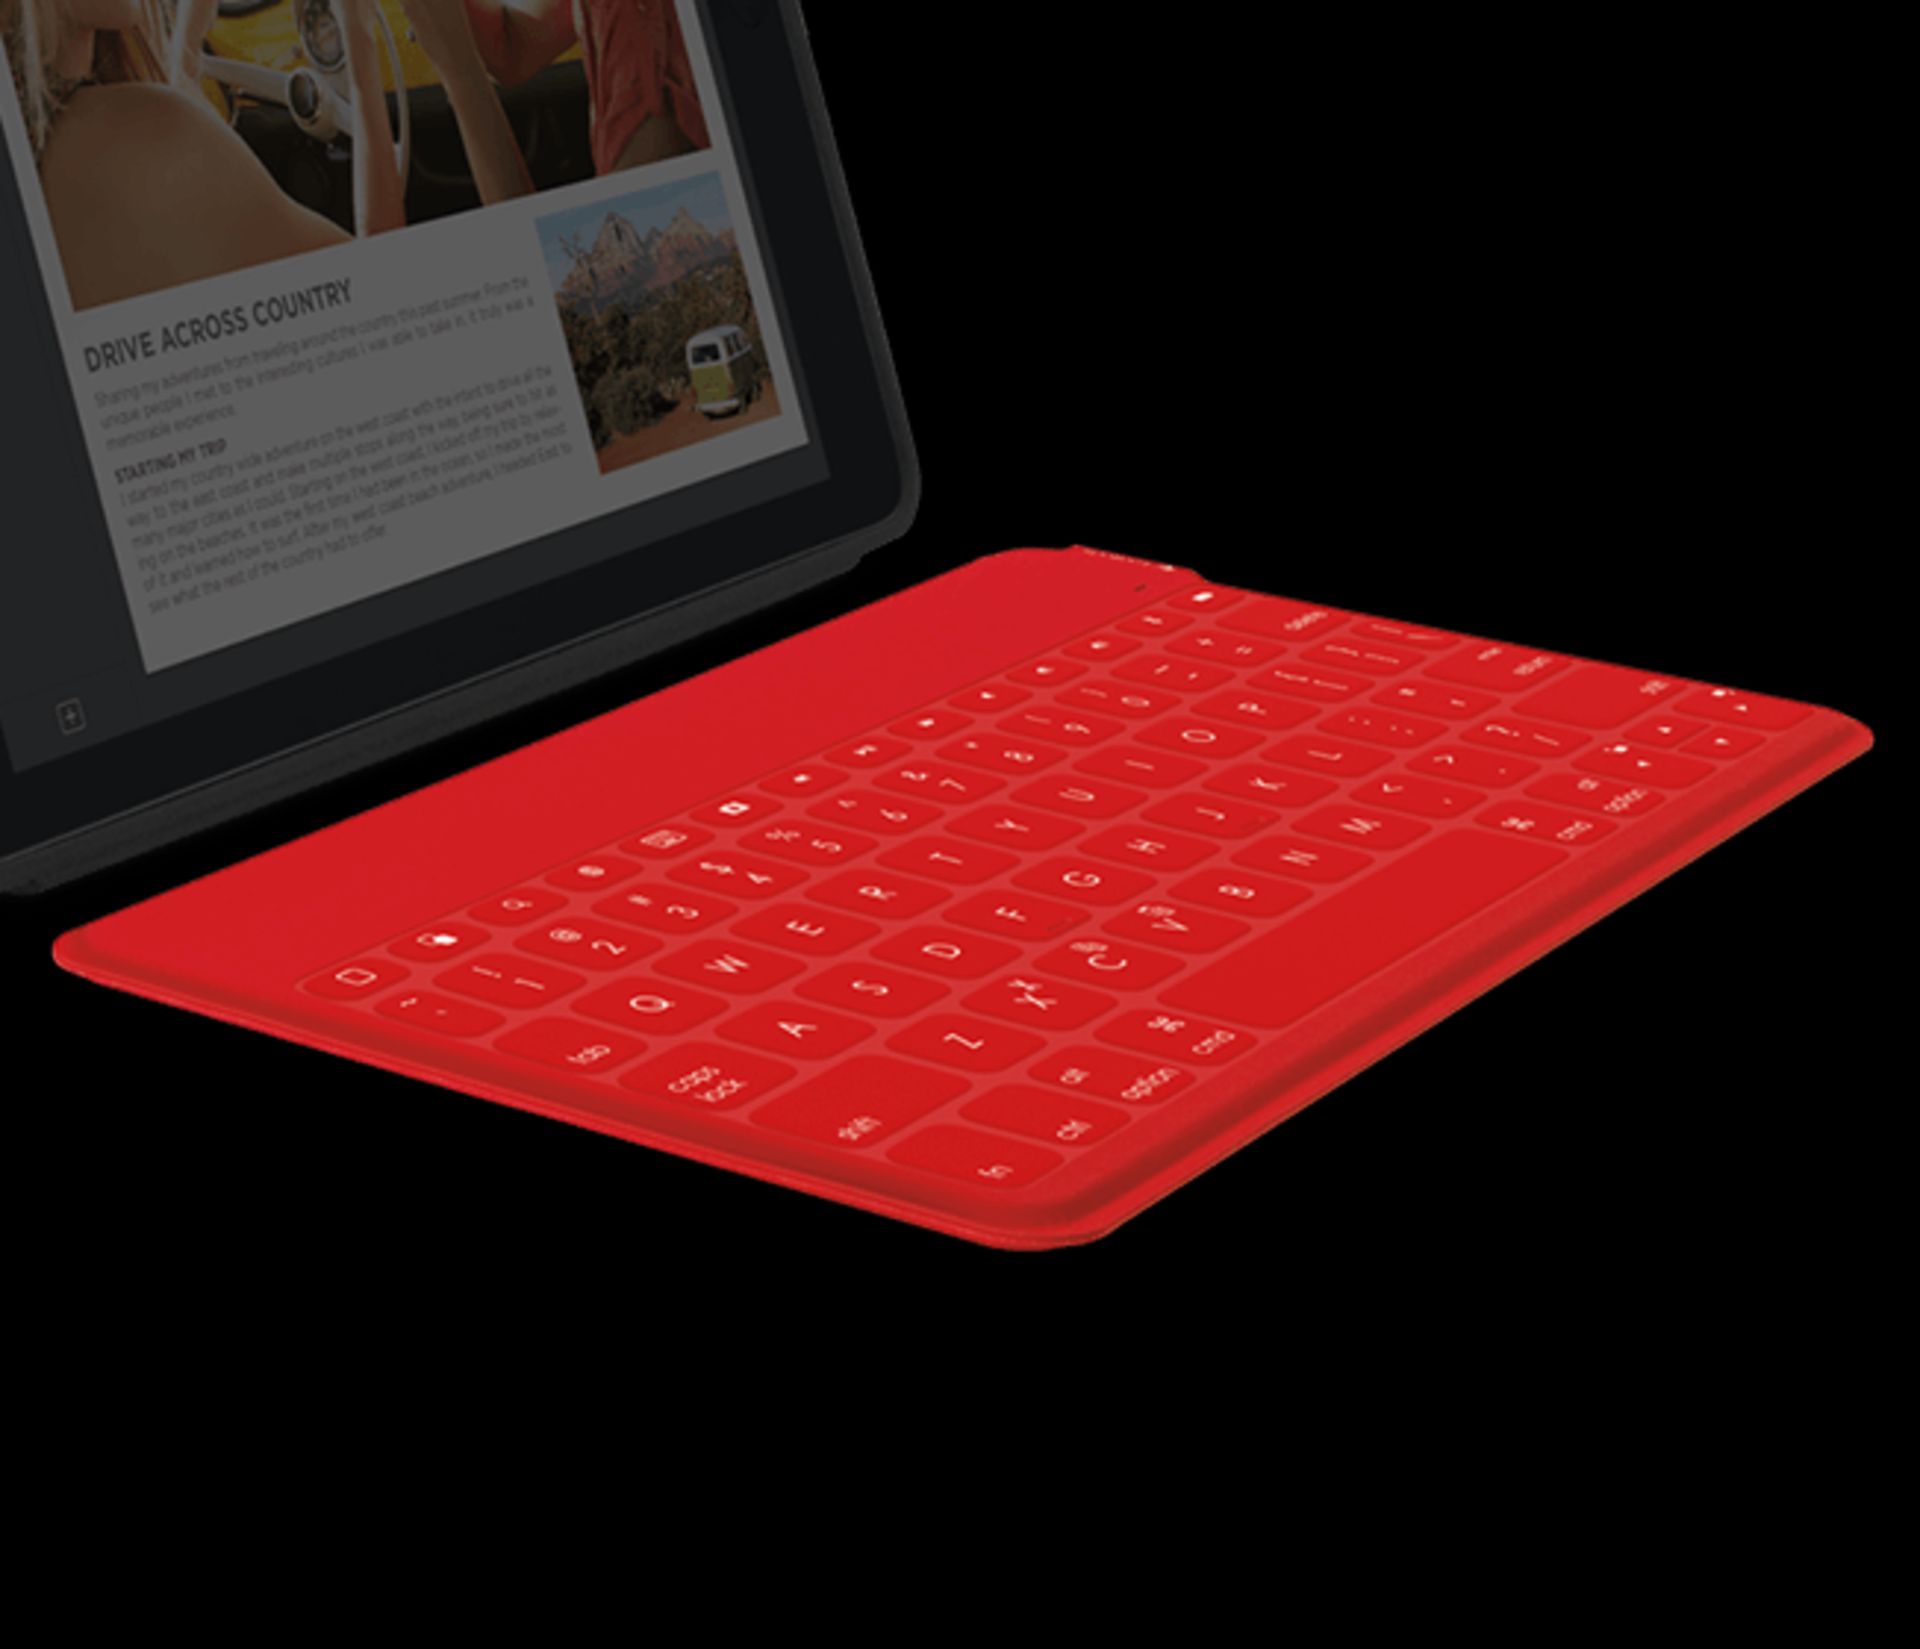 V *TRADE QTY* Brand New Logitech Keys-to-Go Waterproof Wireless Keyboard for iPad iPhone and Apple - Image 2 of 2